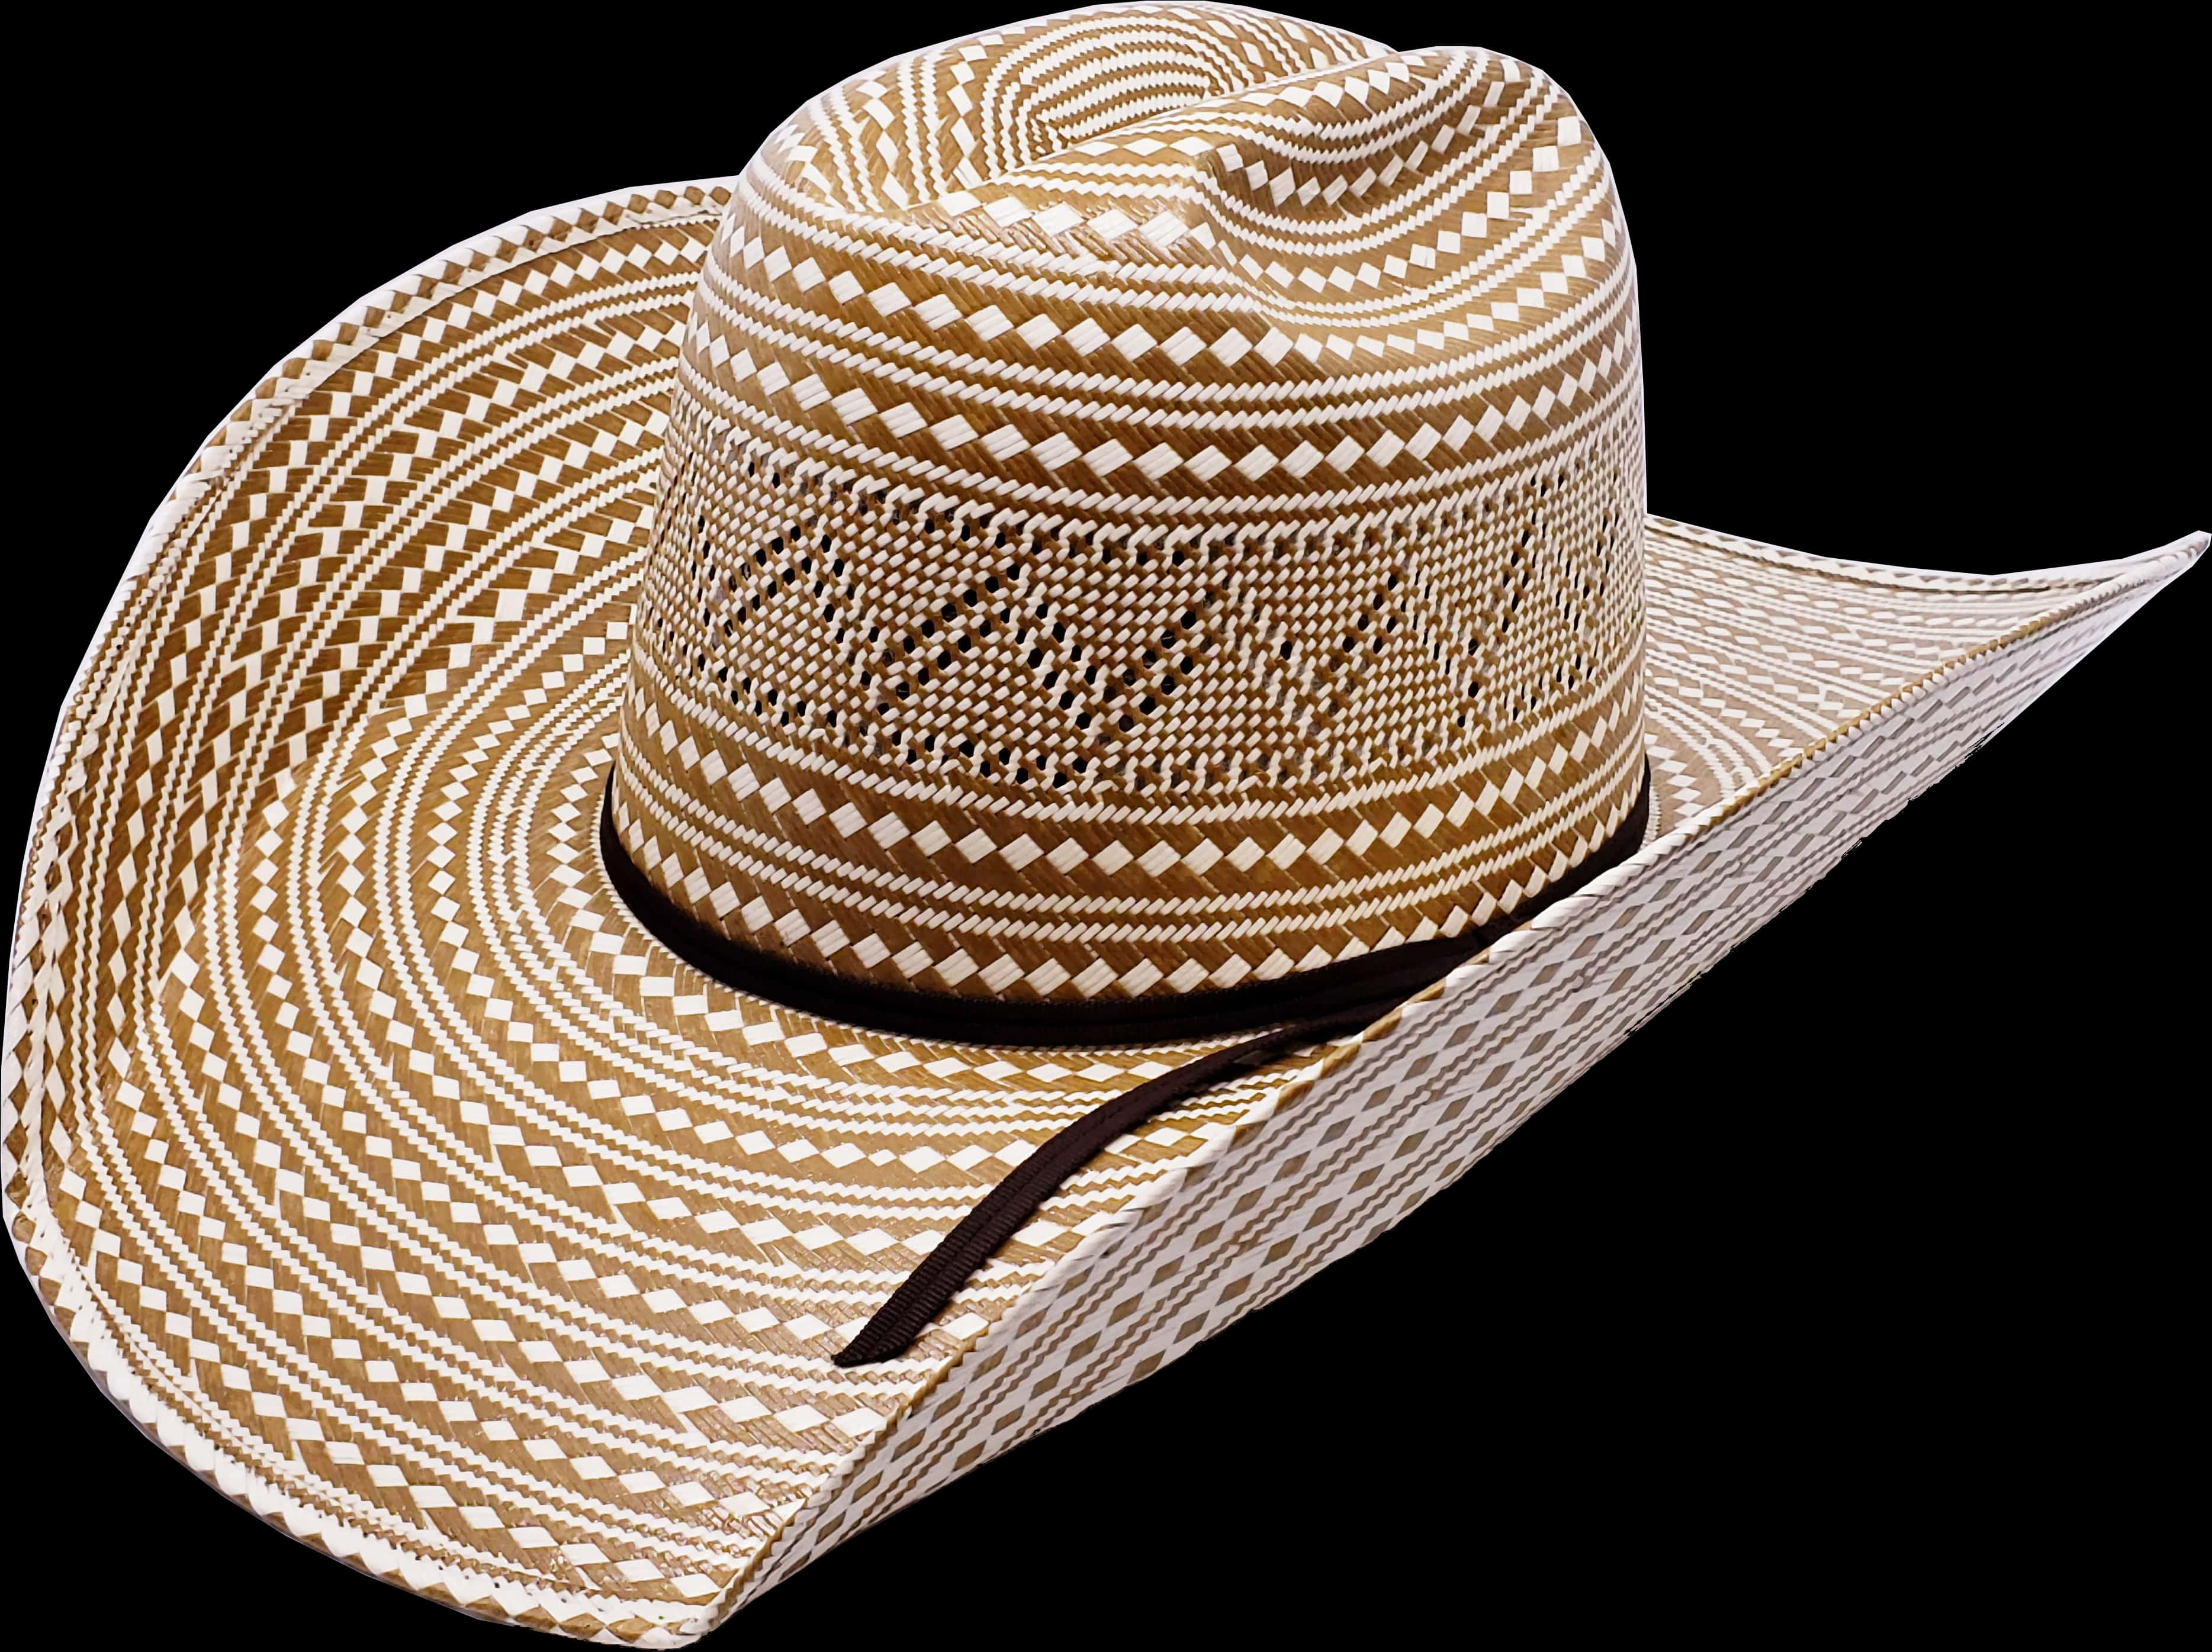 A Brown And White Cowboy Hat